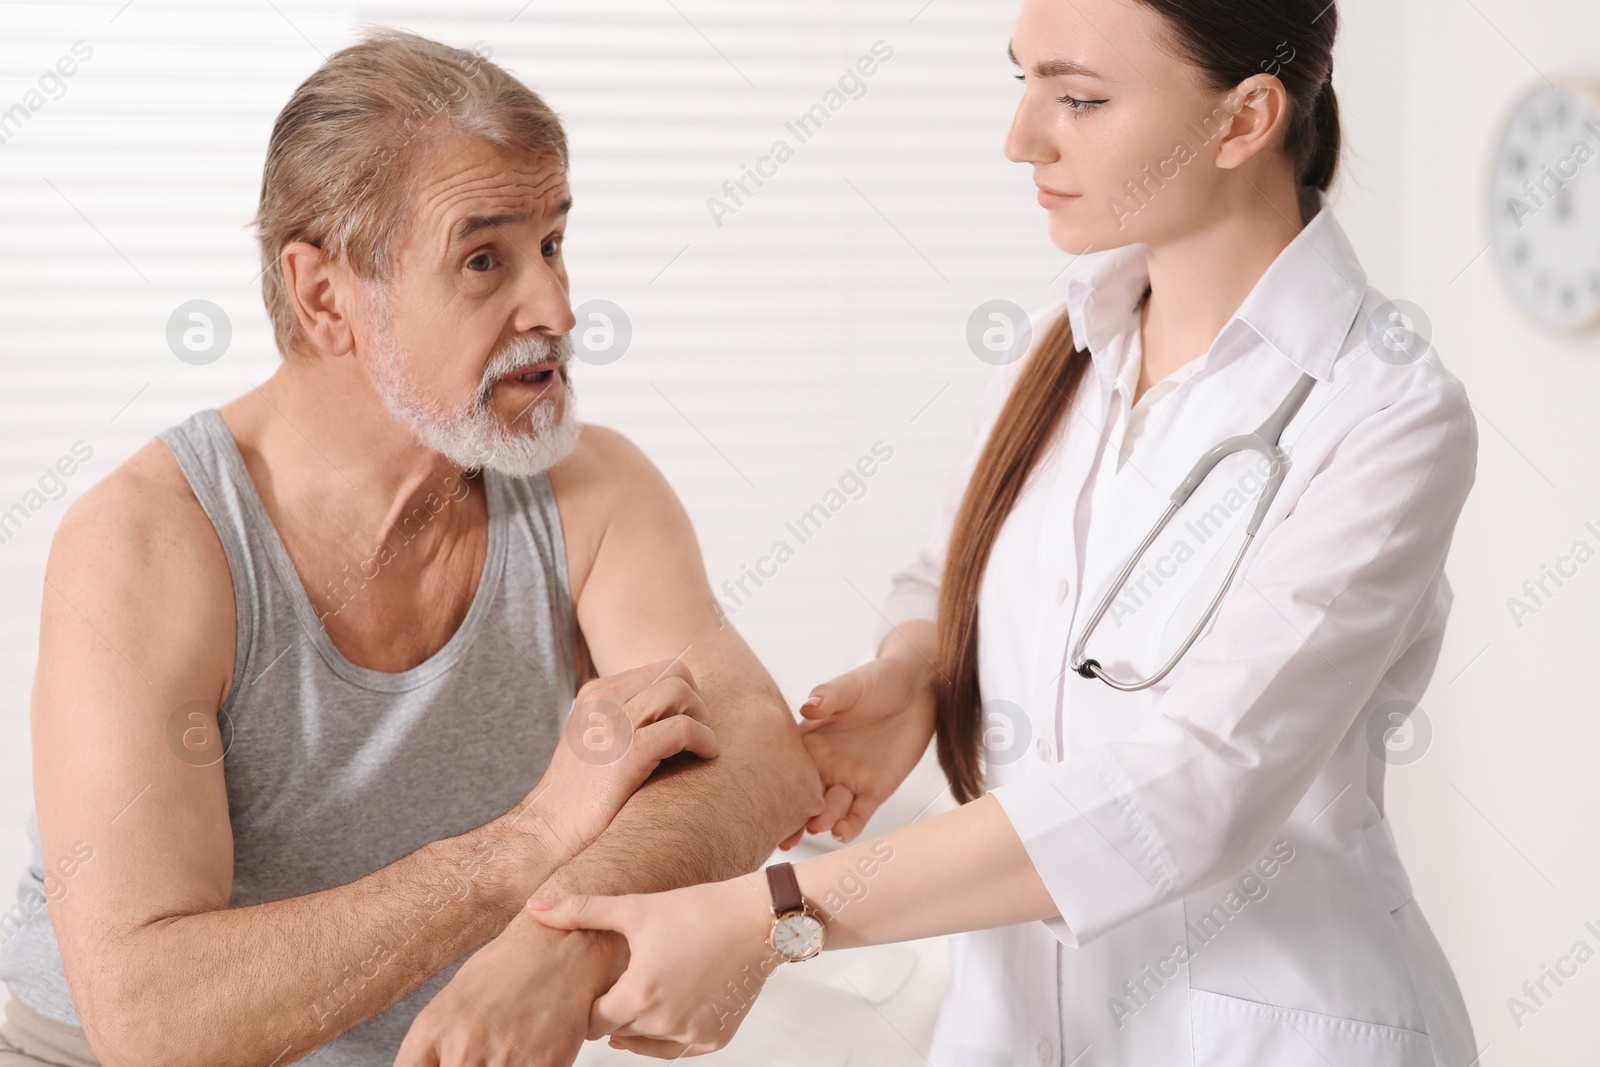 Photo of Orthopedist examining patient with injured arm in clinic